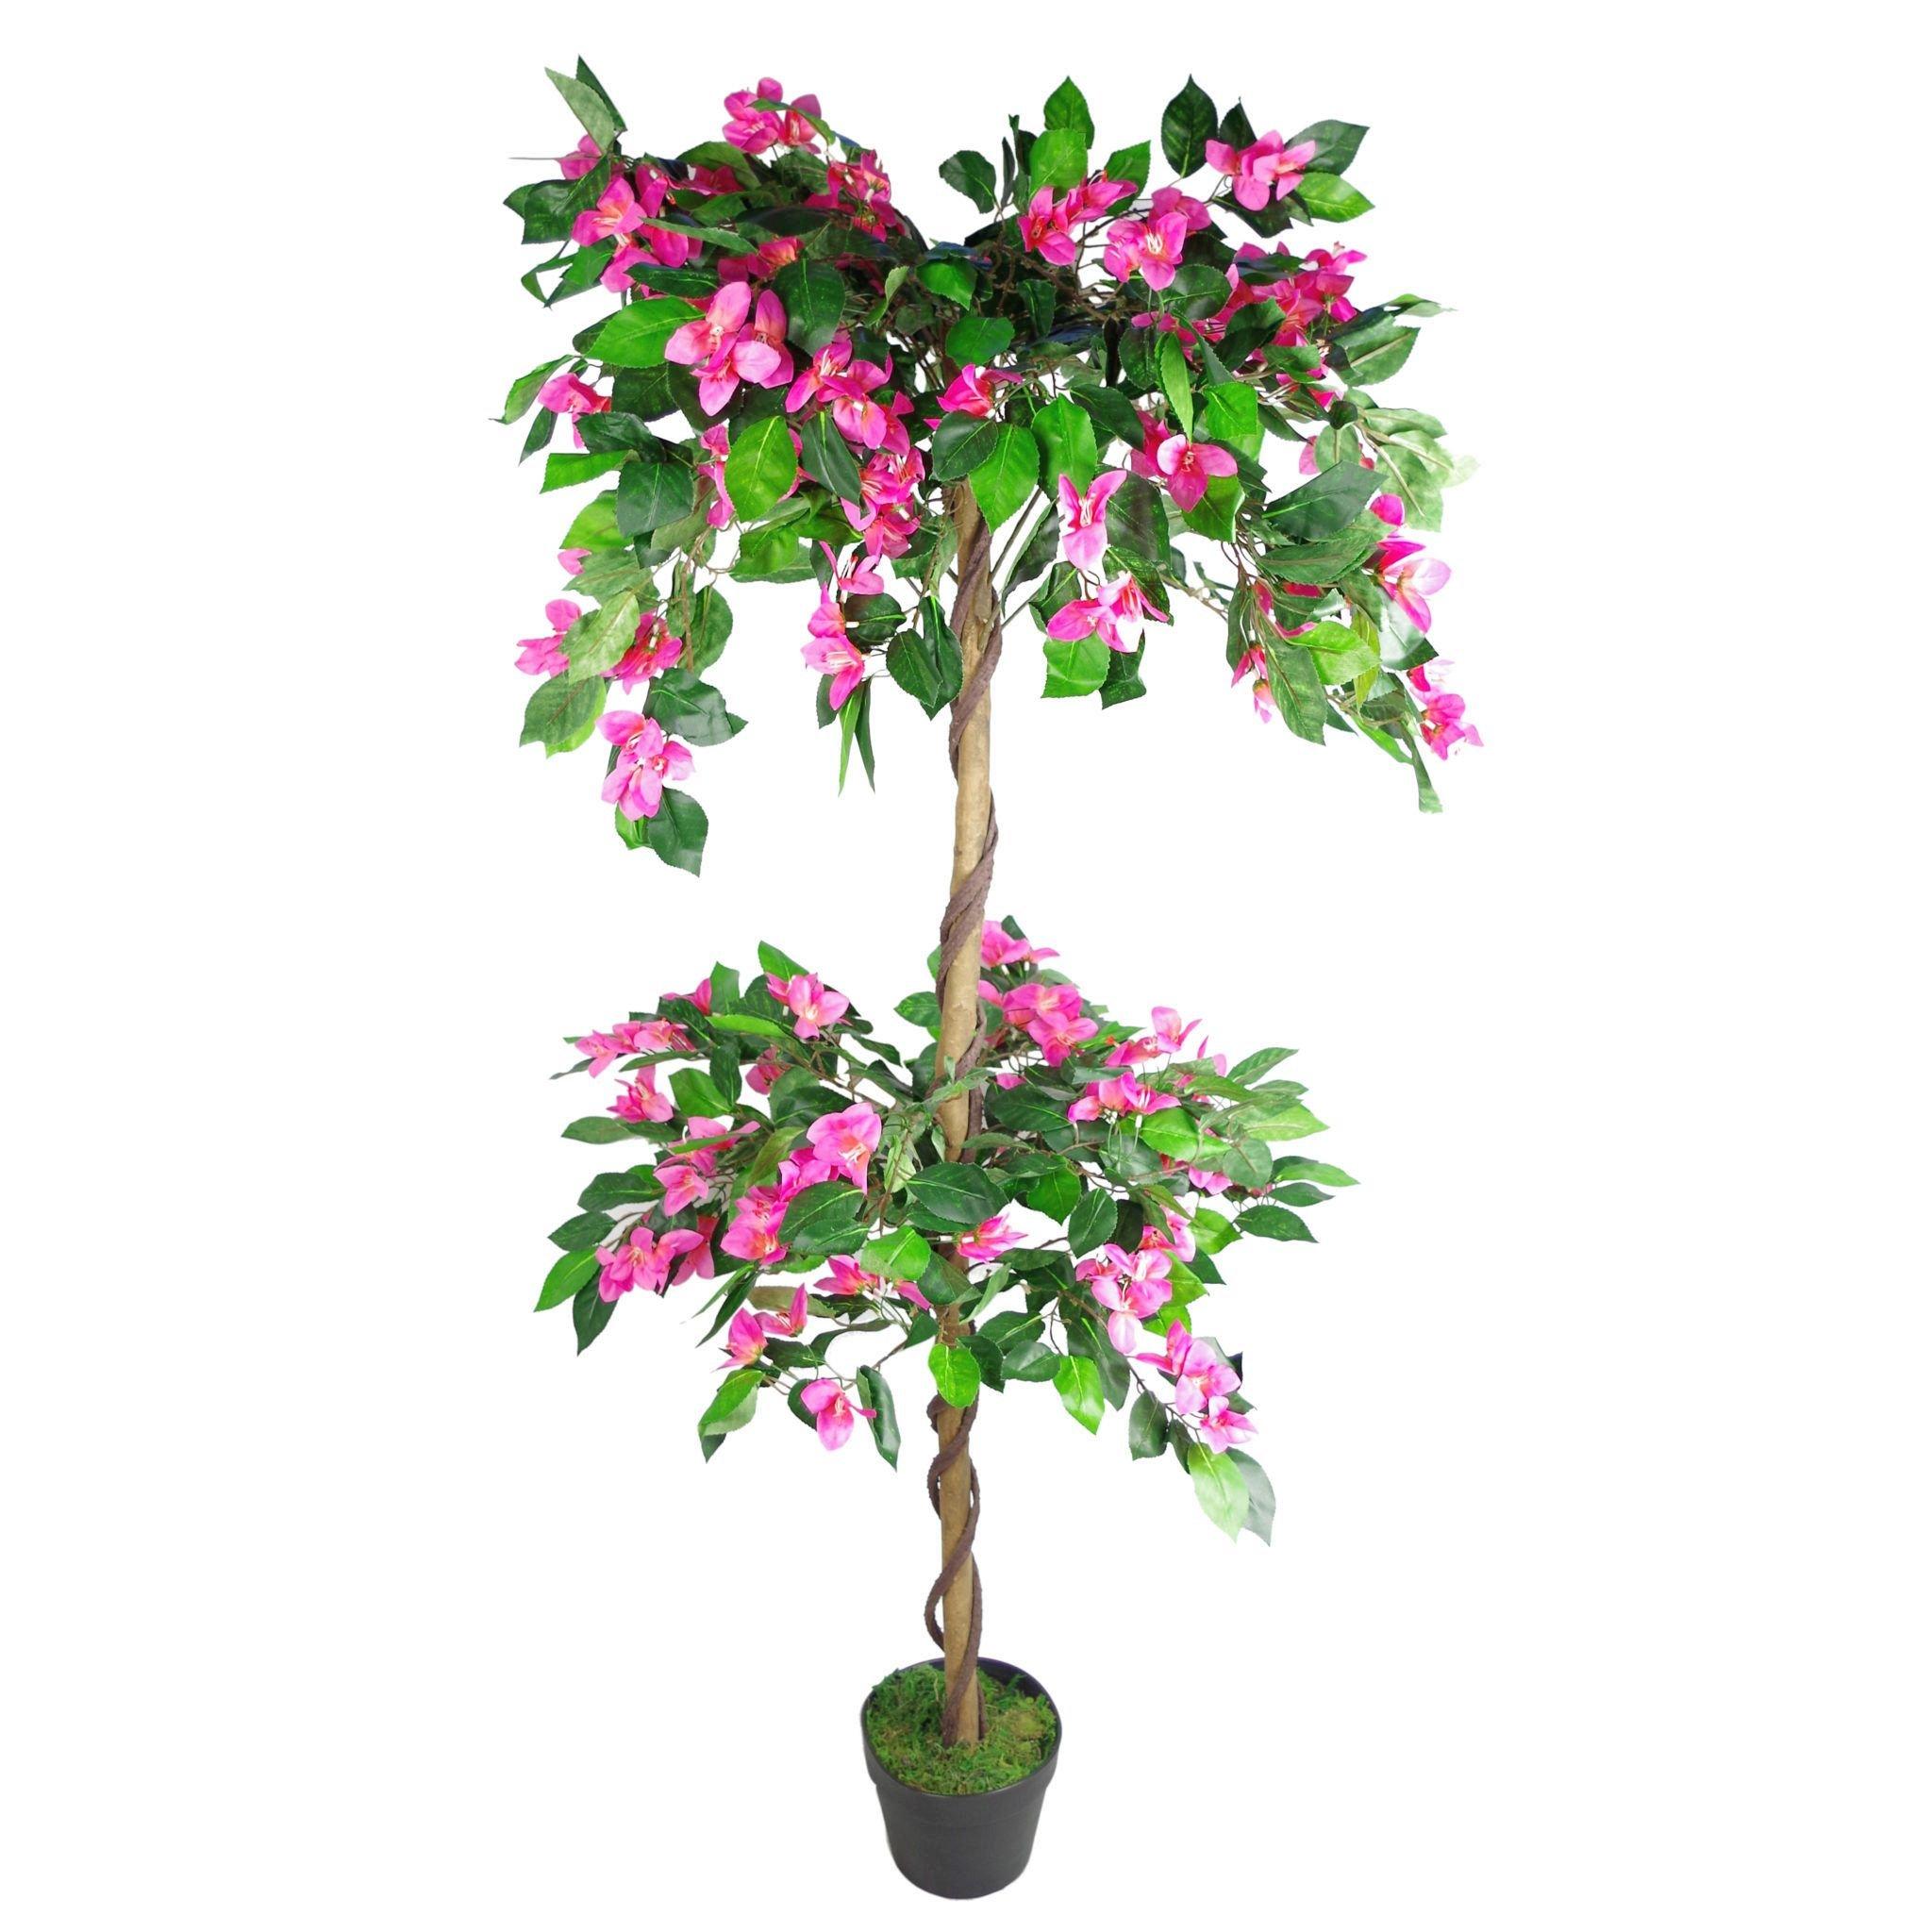 140cm EXTRA LARGE Artificial Flowering Rhododendron Bush Tree